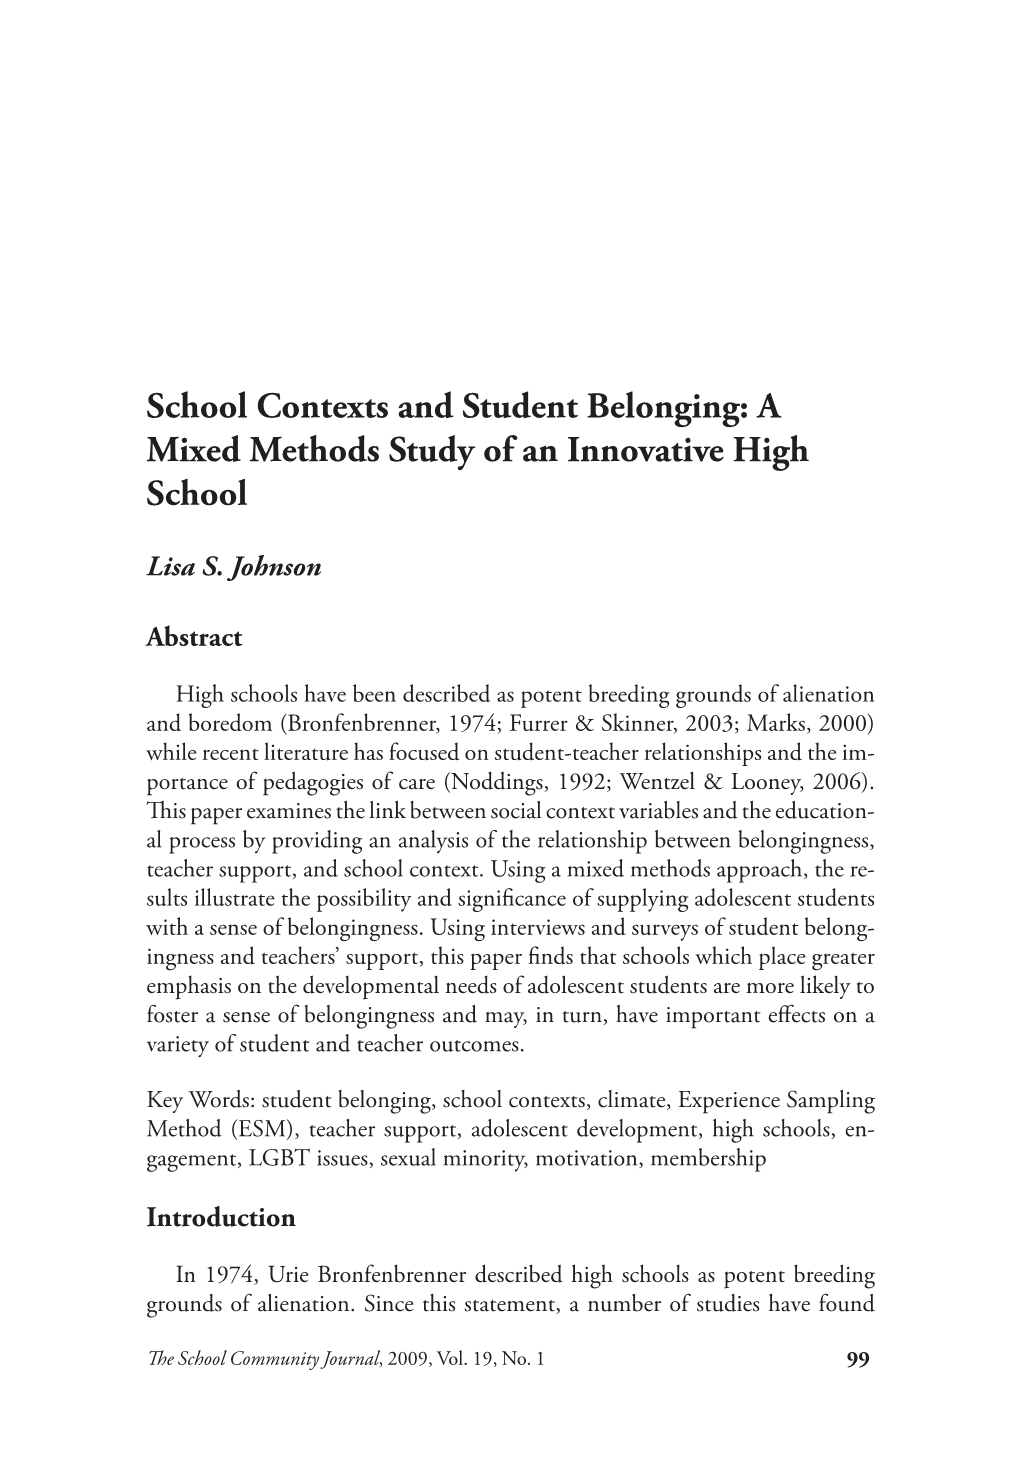 School Contexts and Student Belonging: a Mixed Methods Study of an Innovative High School